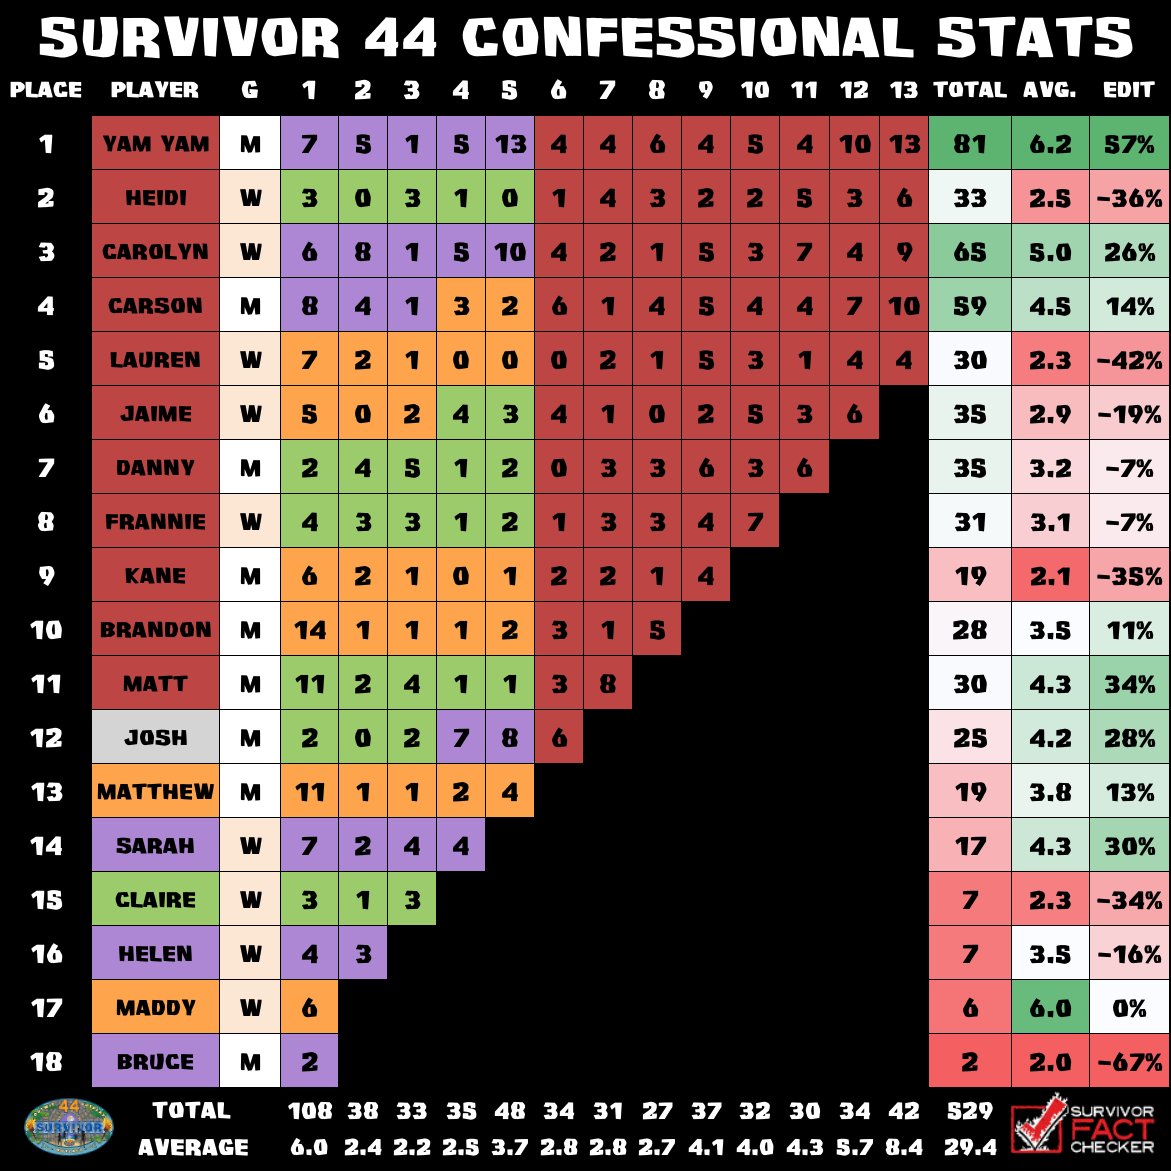 Rob's Fact Checker on X: Final confessional counts for #Survivor 44! Yam  Yam ends the season as the overall confessional leader. His 81  confessionals is the 9th most EVER for a player